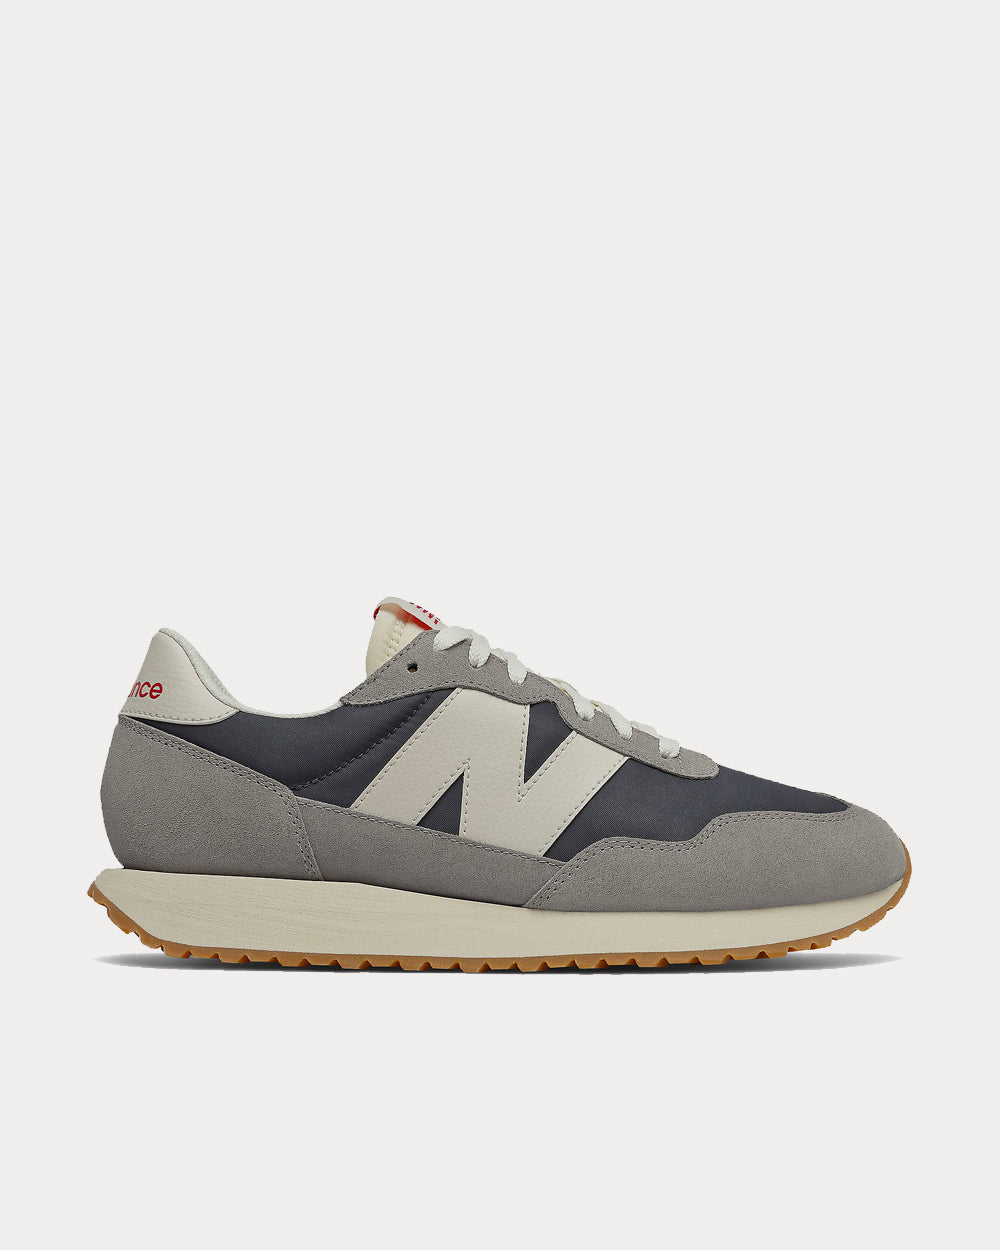 New Balance 237 Marblehead with Moonbeam Low Top Sneakers - Sneak in Peace